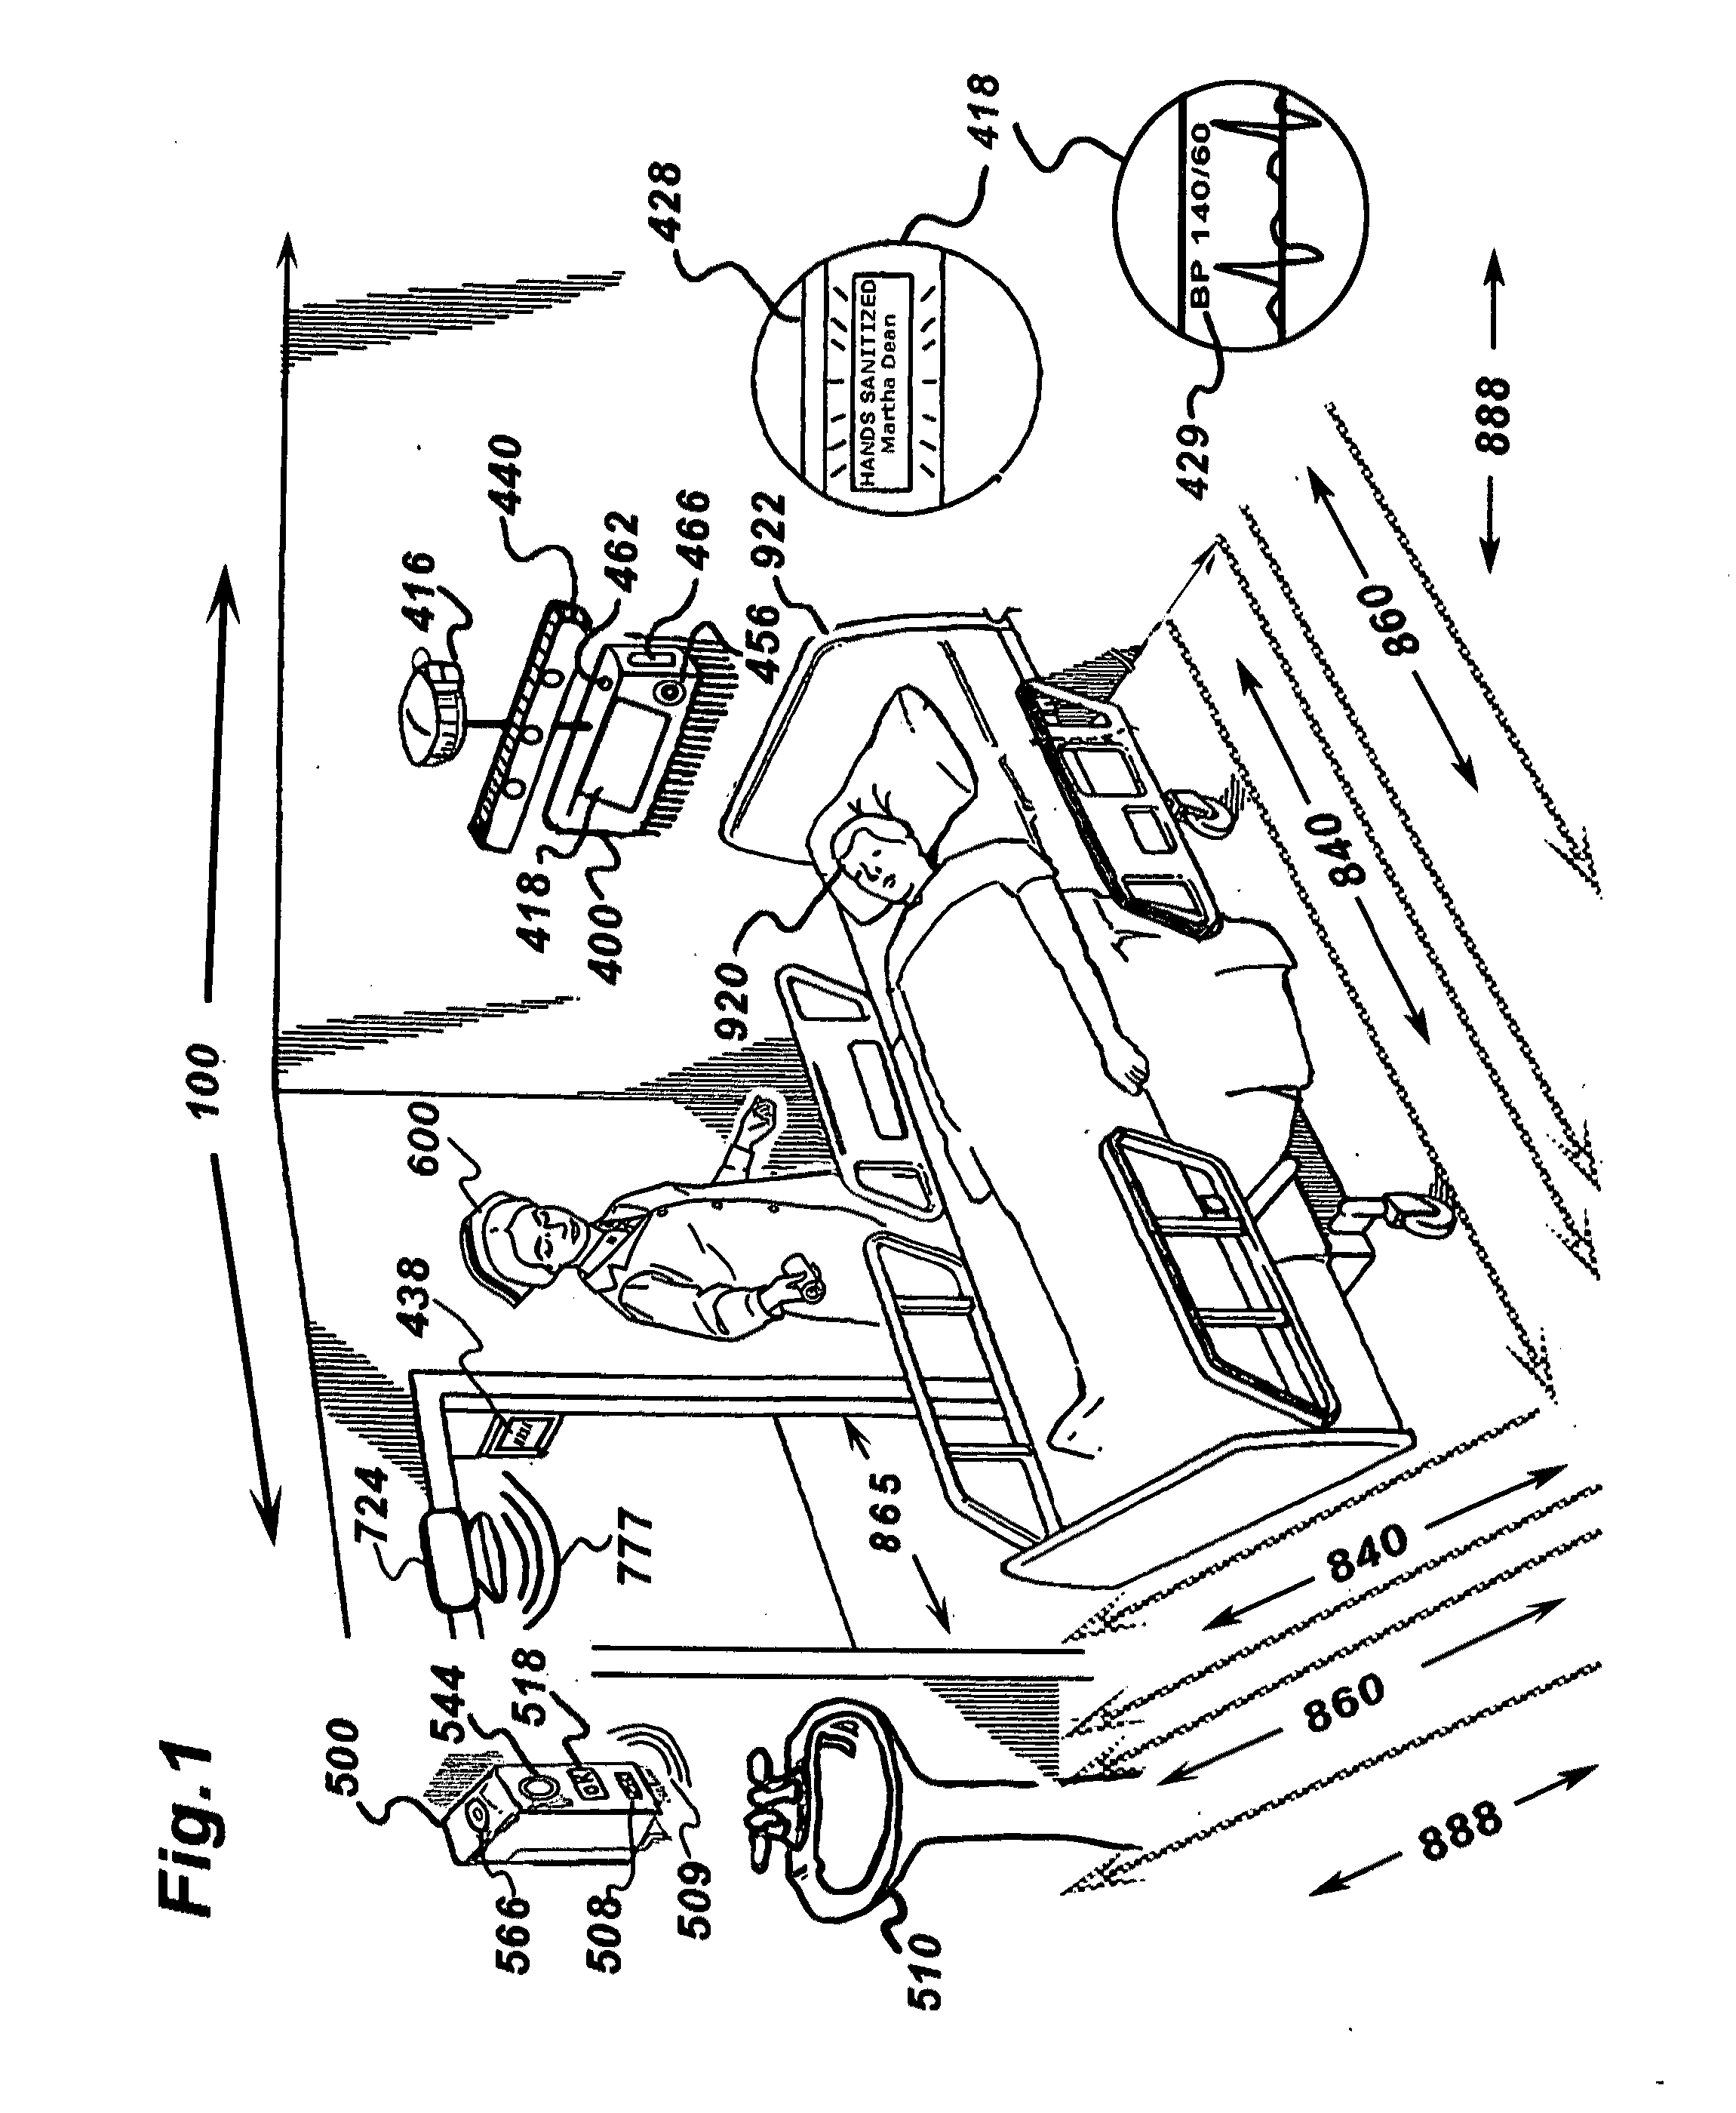 Systems and methods for monitoring caregiver and patient protocol
compliance